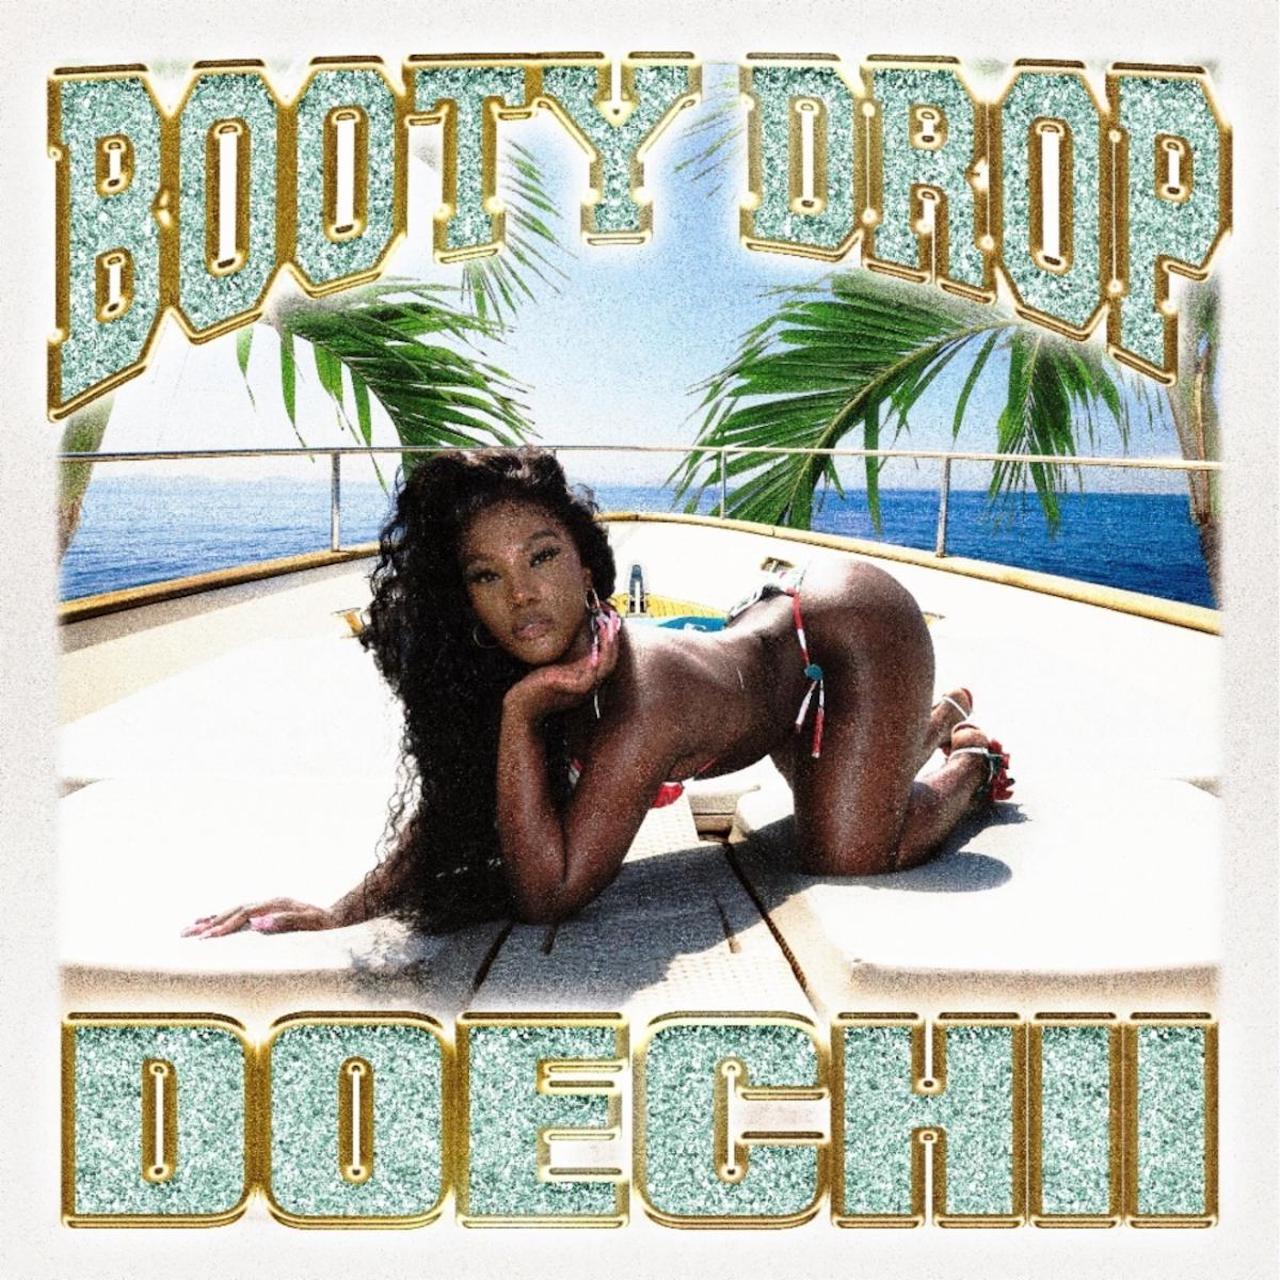 Doechii Continues Meteoric Rise With ‘Booty Drop’ uDiscover